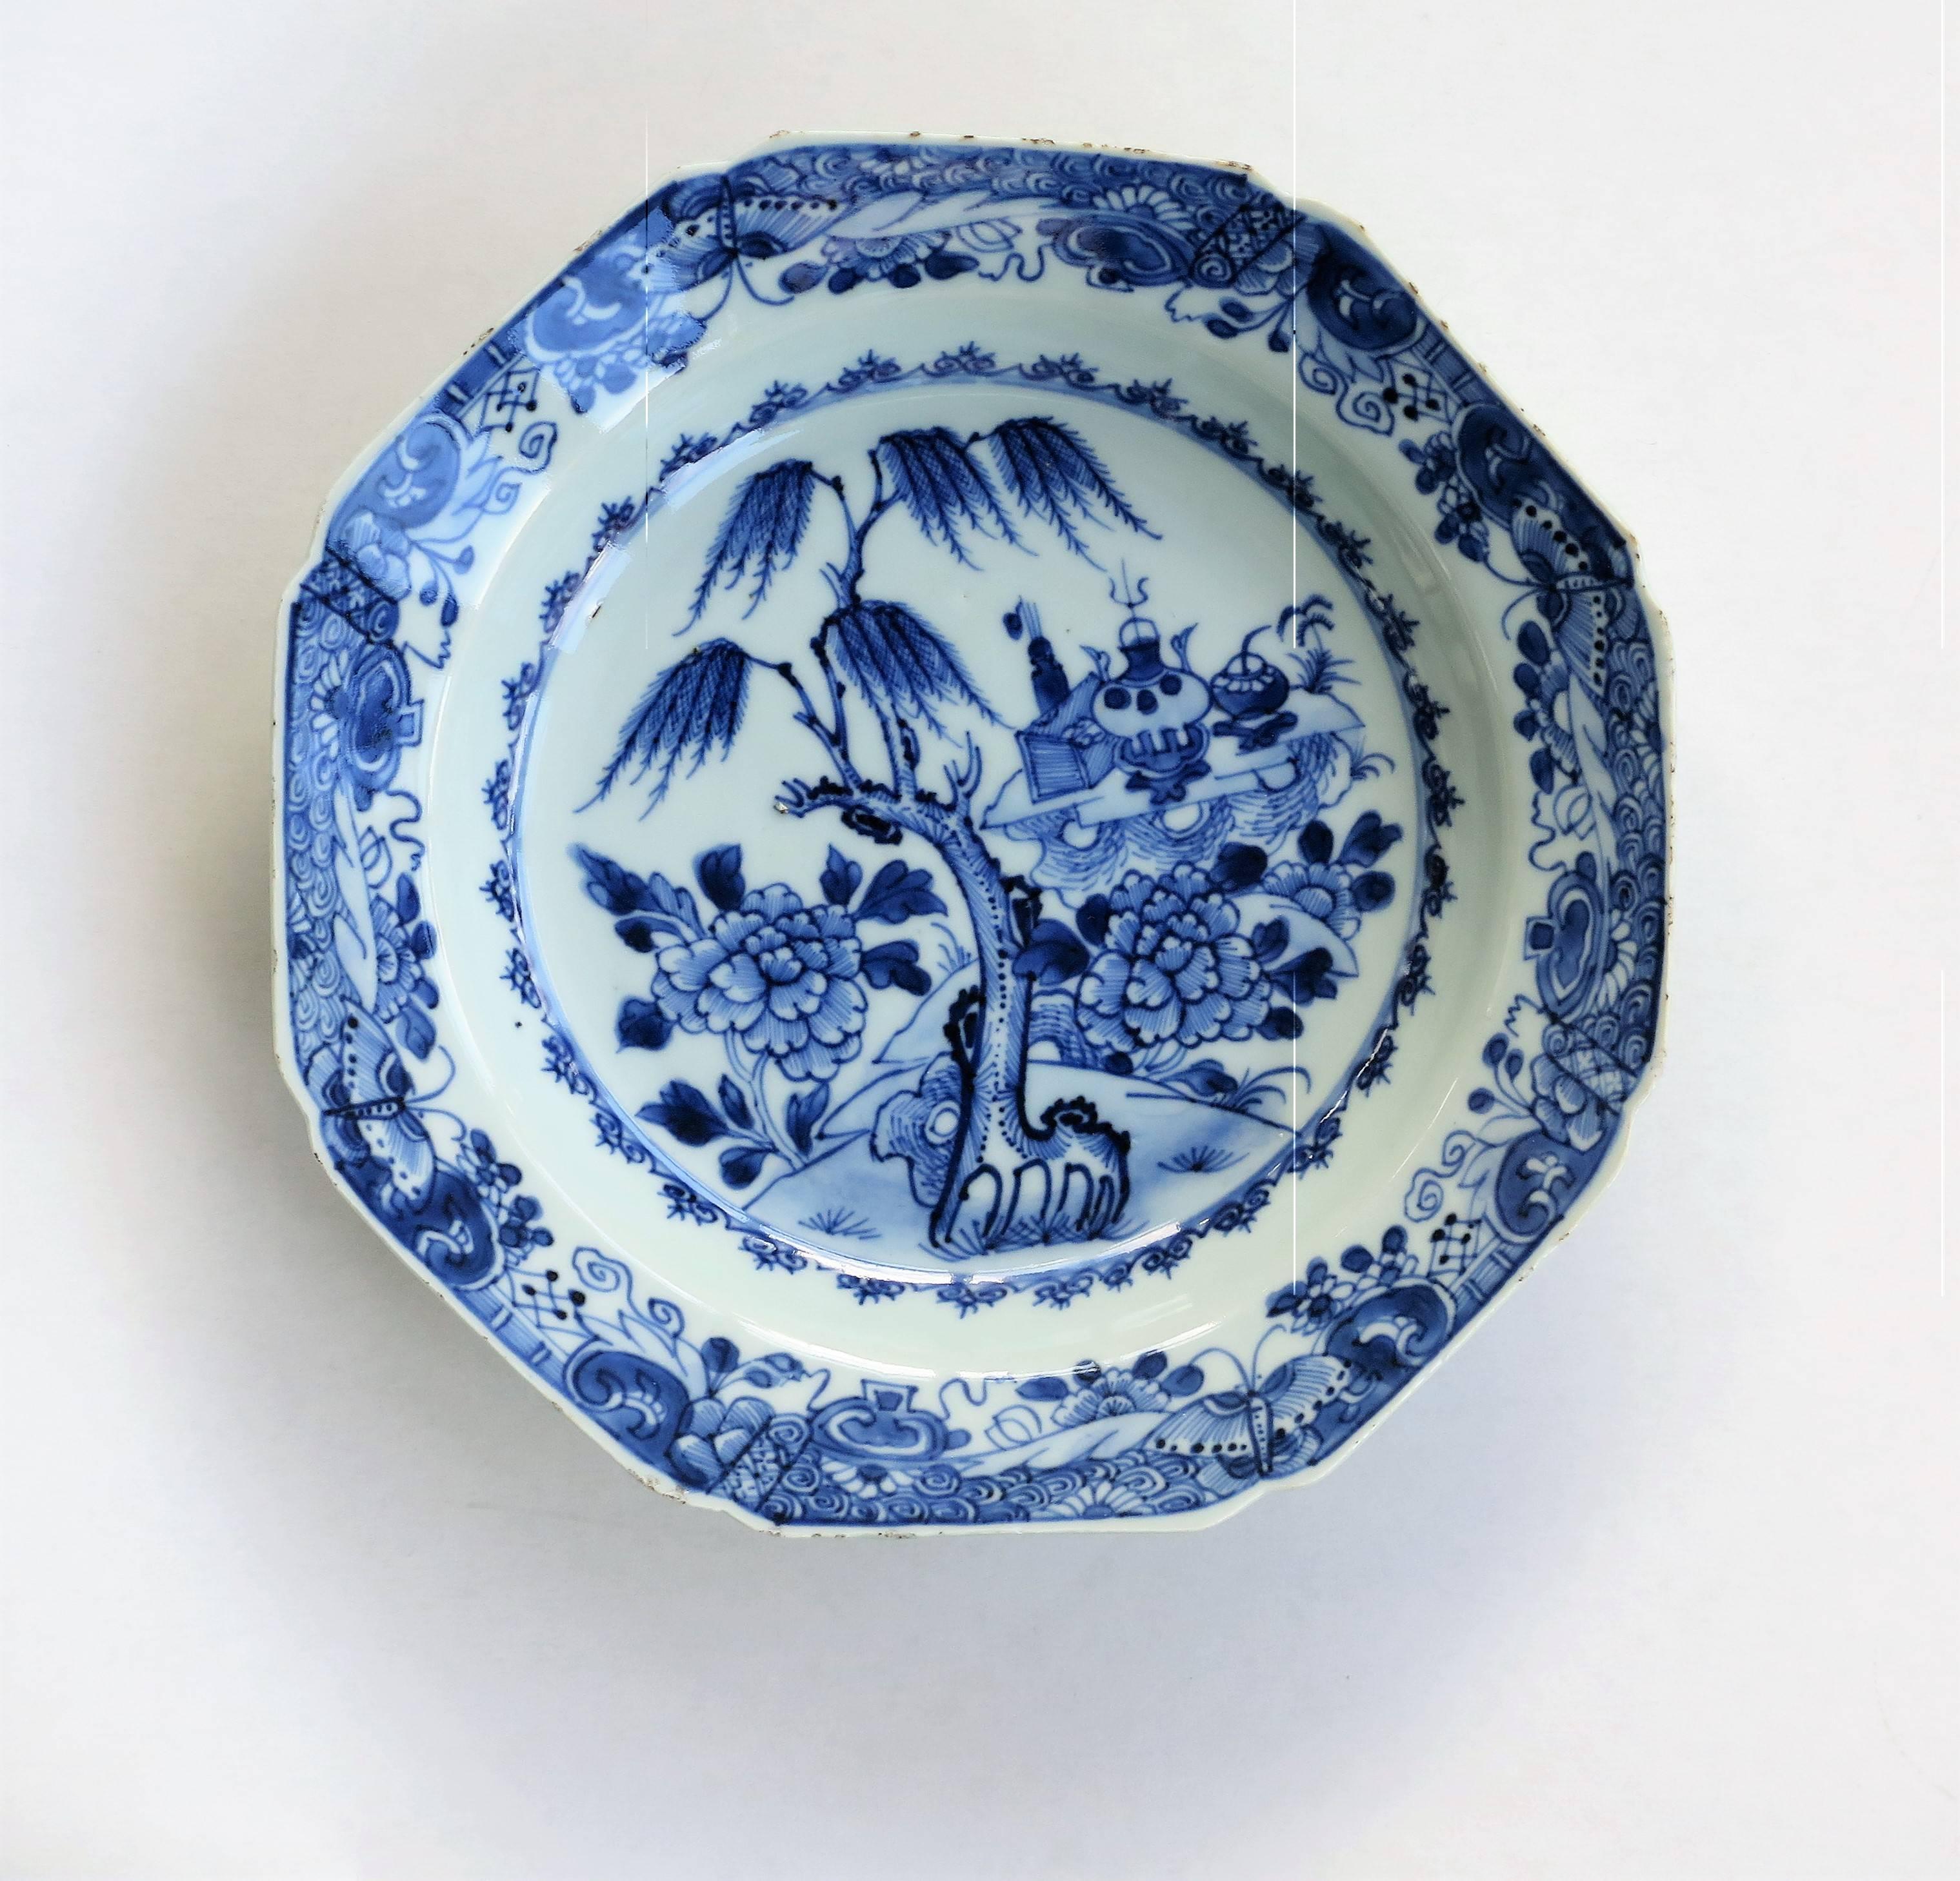 This is a very good Chinese porcelain Soup plate made for the export (Canton) market, during the late 18th century.

The plate is octagonal in shape and well decorated in varying shades of cobalt blue, with a glaze of a very soft light blue/green